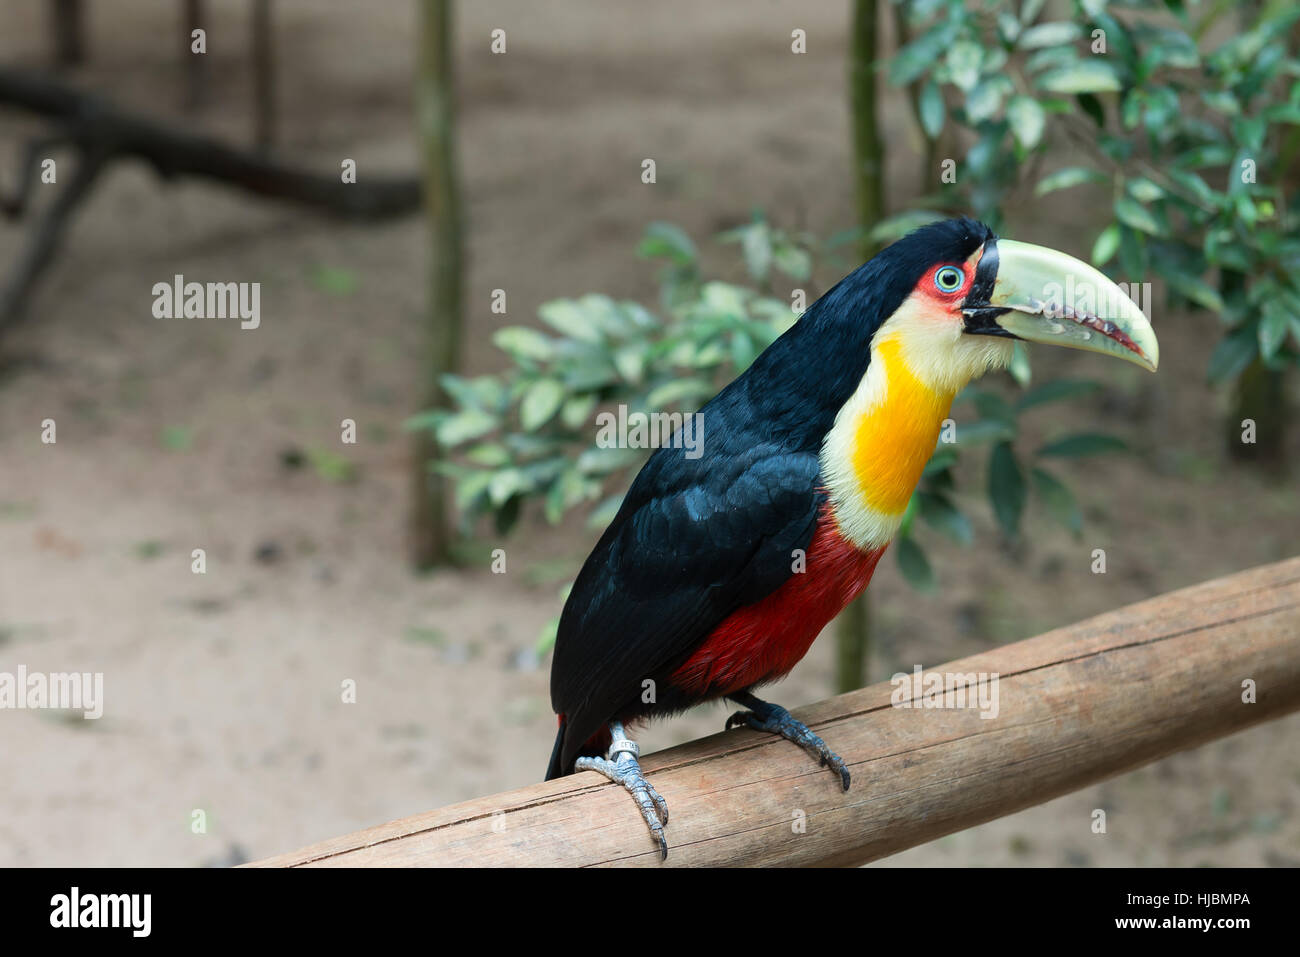 Foz do Iguazu,  Brazil - july 9, 2016: Green-billed (Red-breasted) toucan. Selective focus. Exotic toucan a brazilian bird in nature at the Foz do Igu Stock Photo